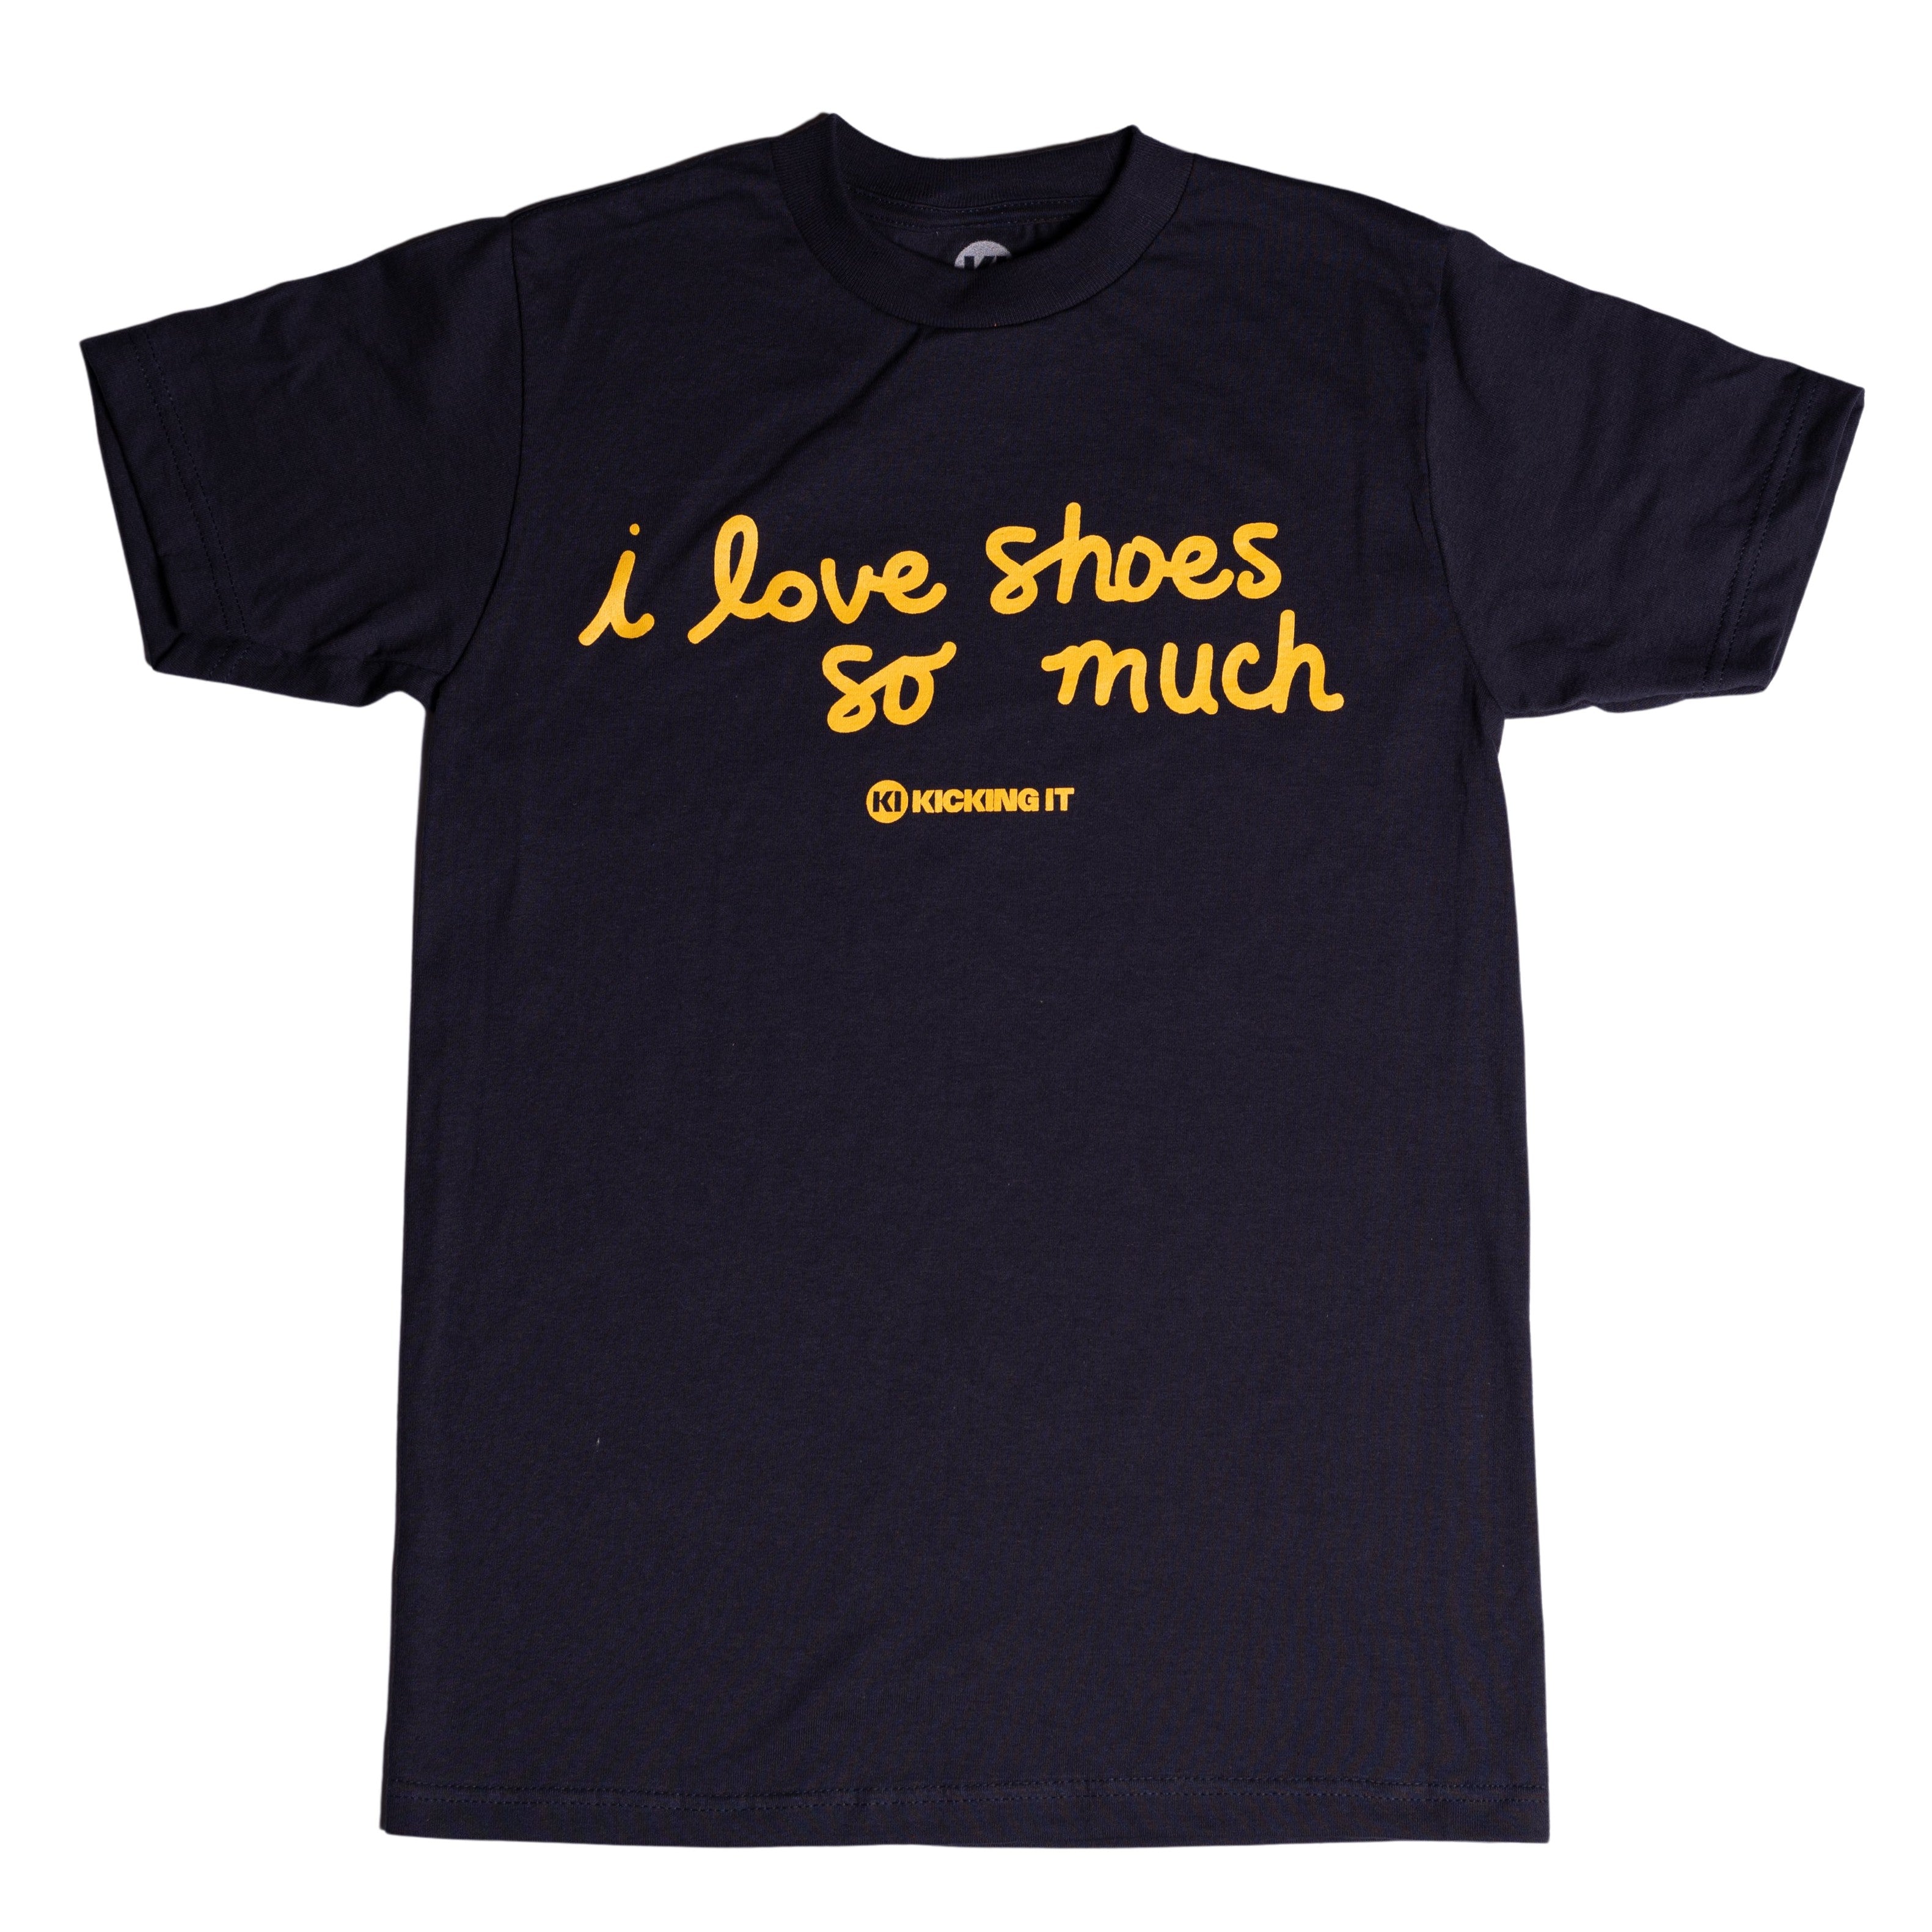 I Love Shoes So Much Tee (Navy/Gold)